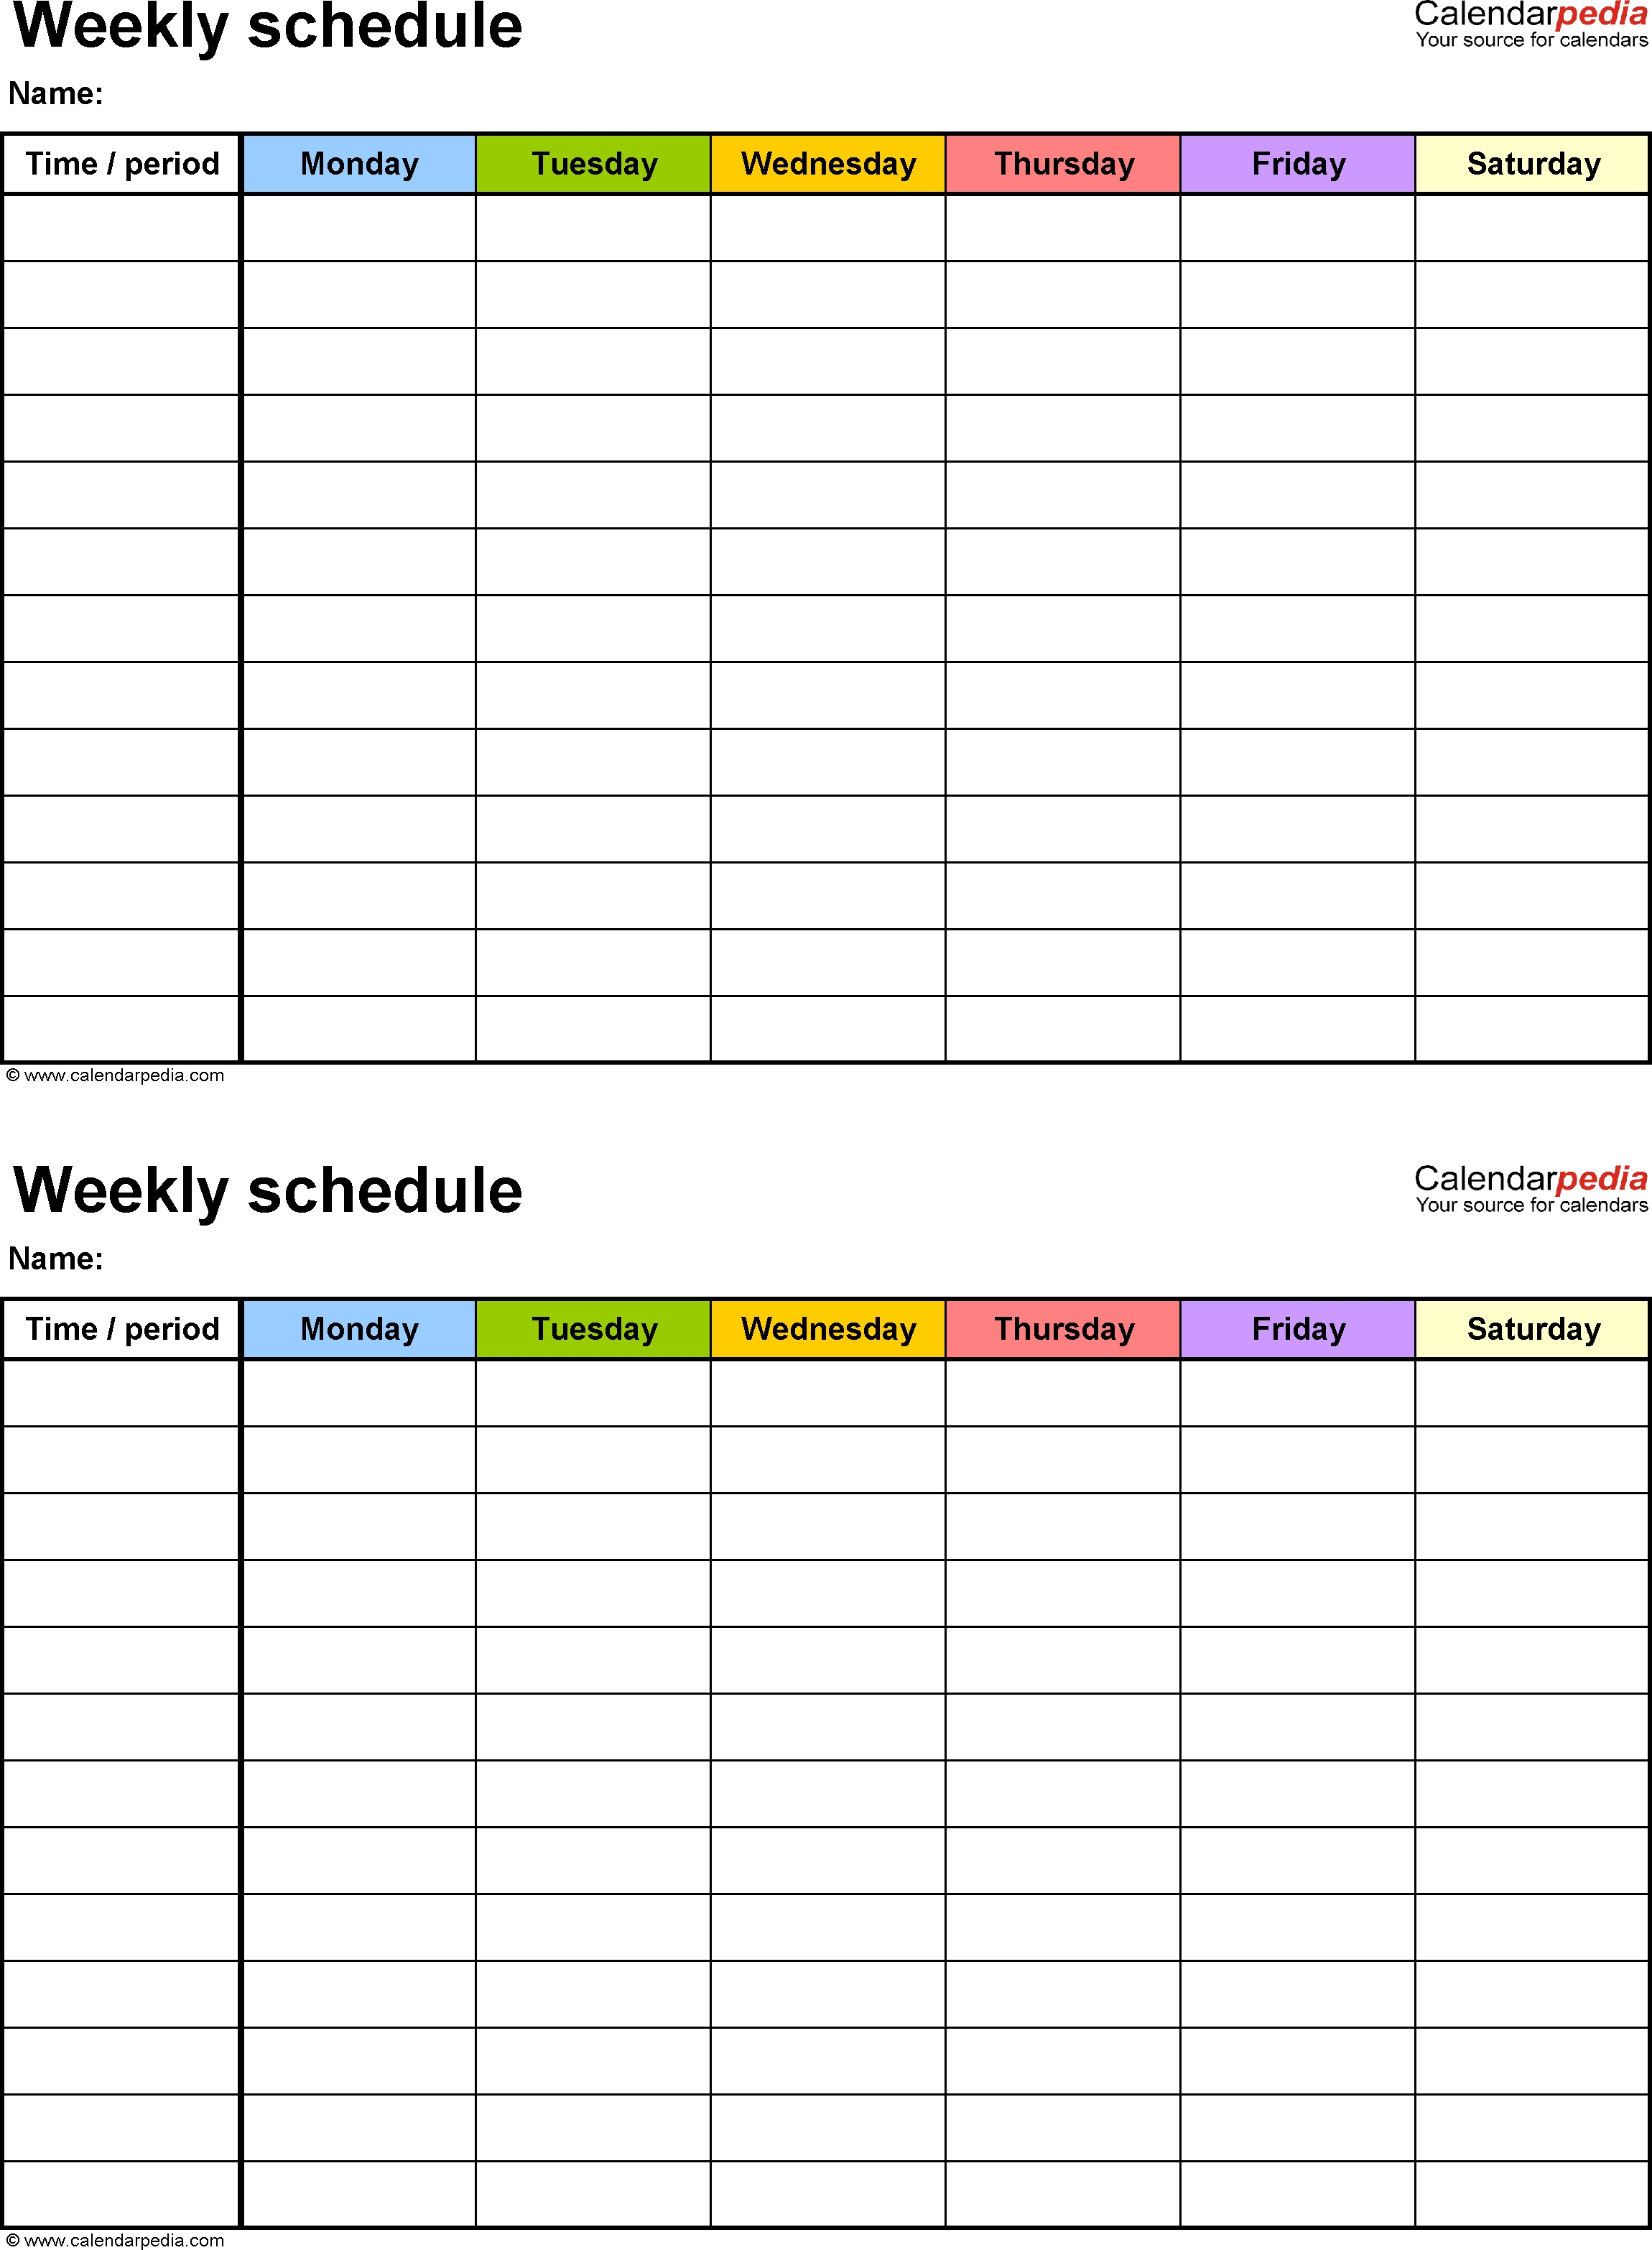 Free Weekly Schedule Templates For Word - 18 Templates with regard to 7 Day Calendar Template Fillable